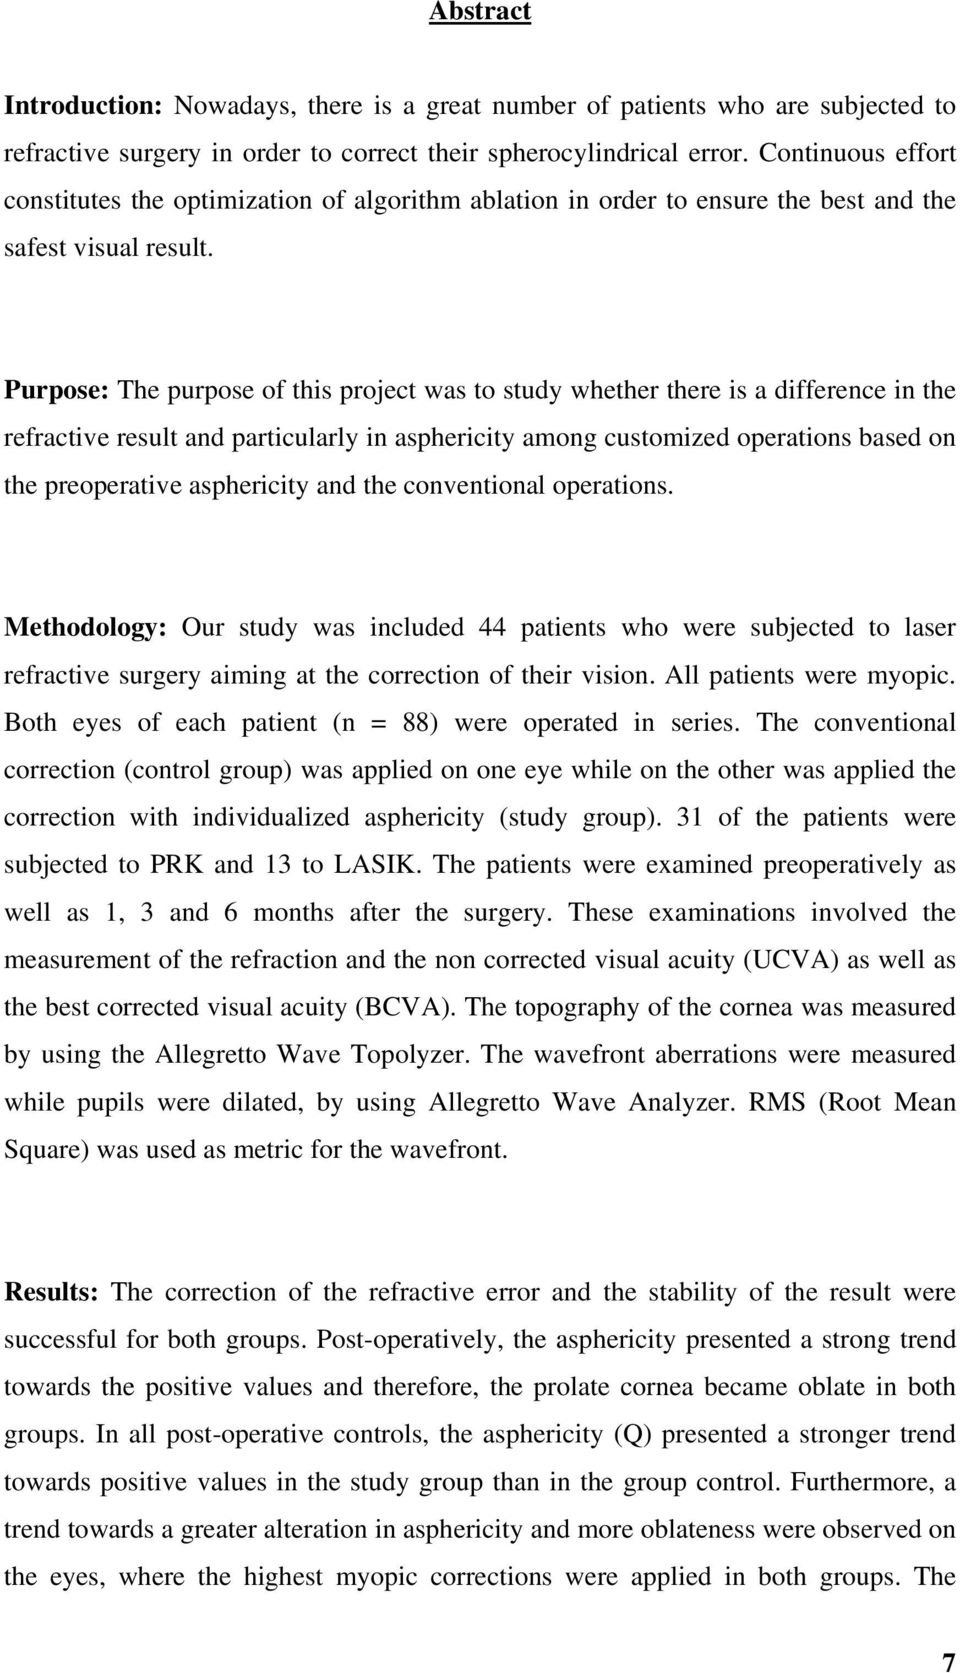 Purpose: The purpose of this project was to study whether there is a difference in the refractive result and particularly in asphericity among customized operations based on the preoperative